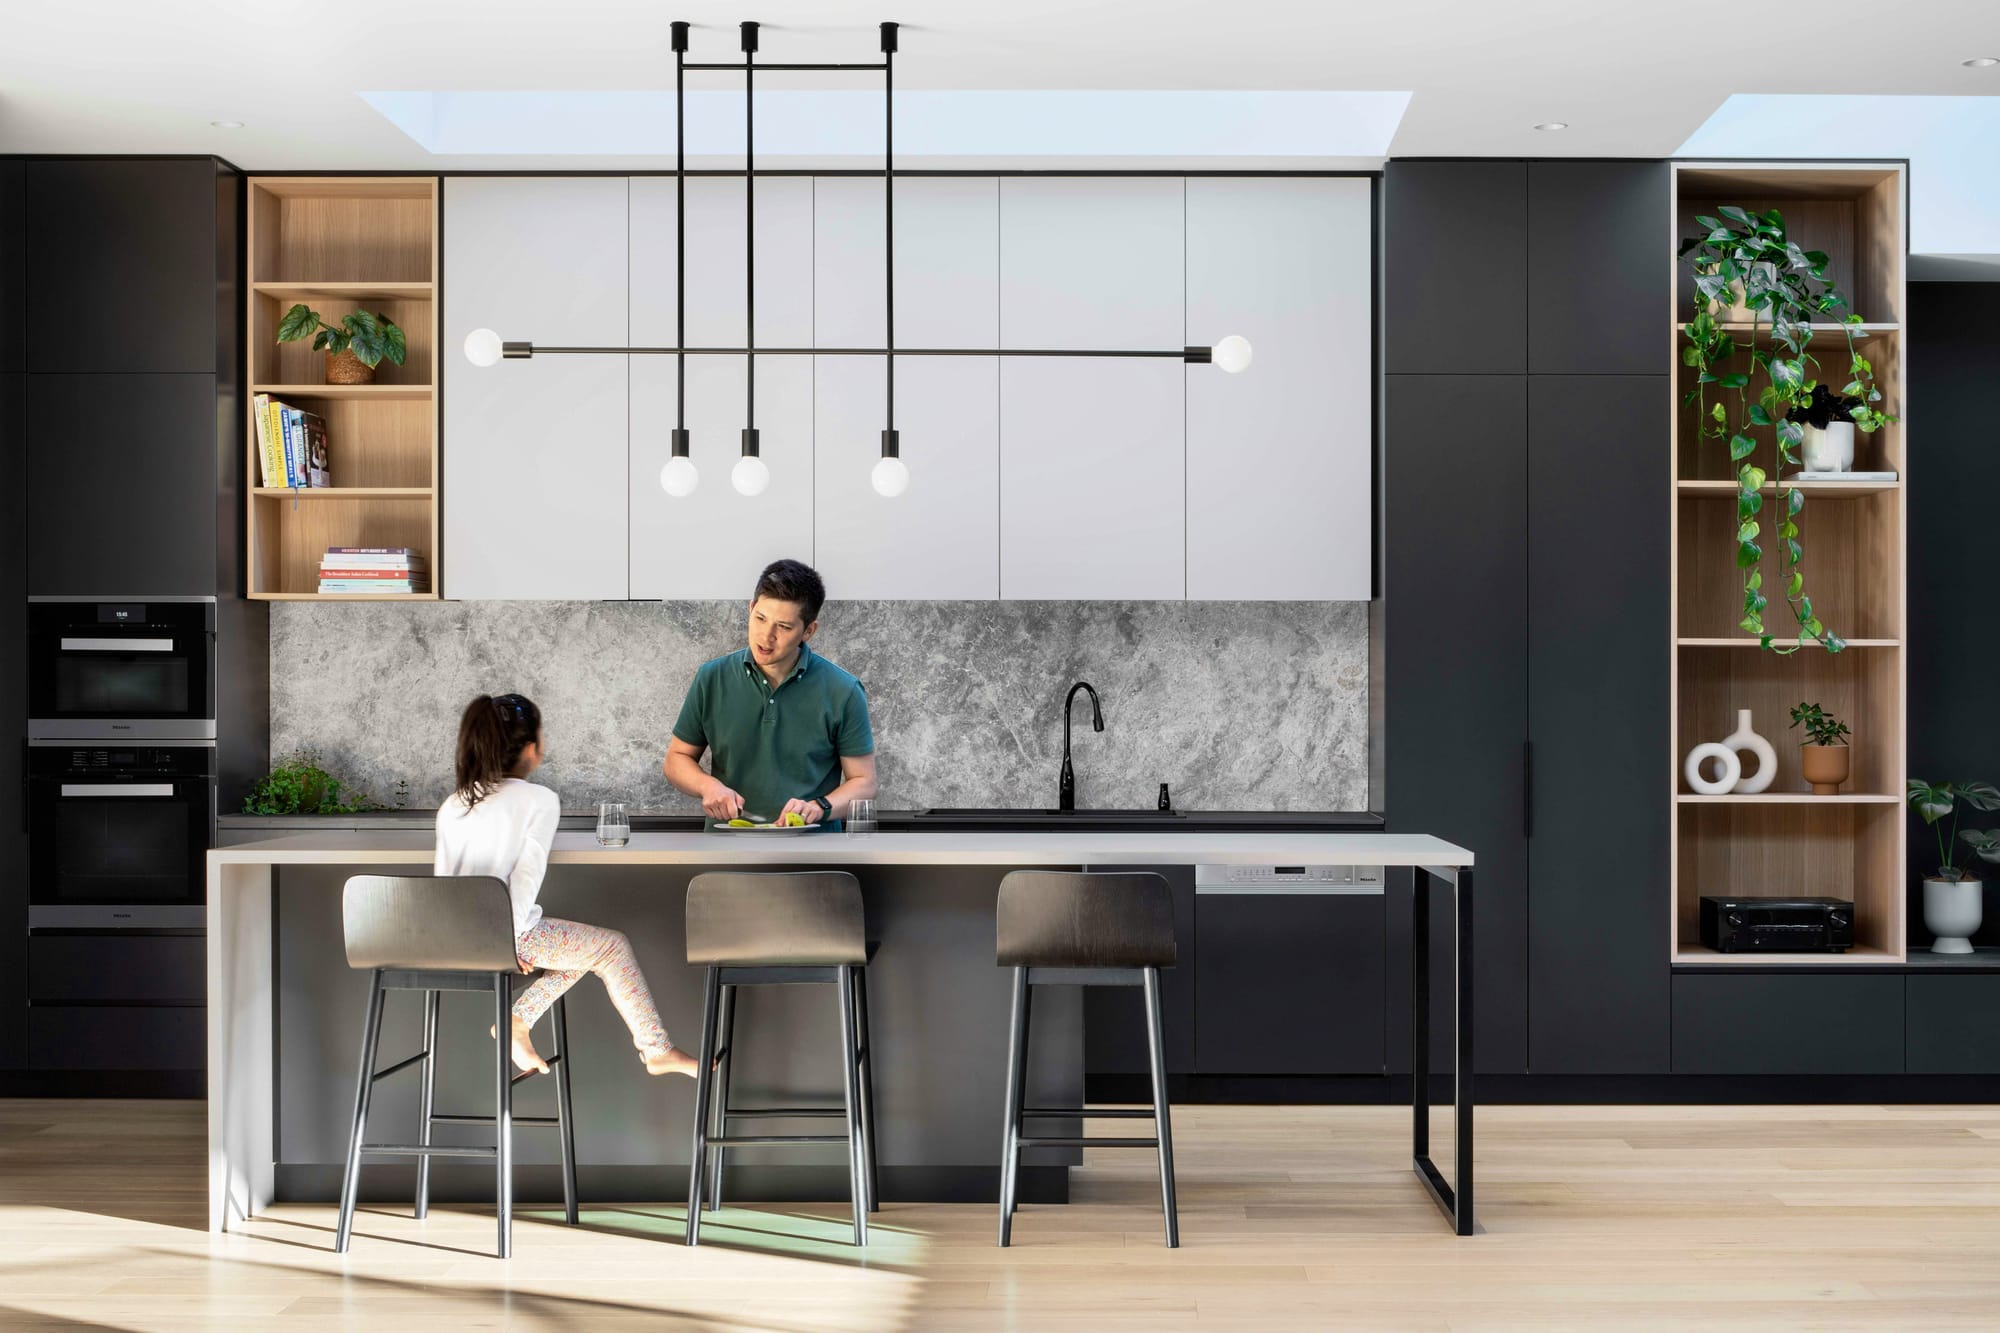 Dickens Street Residence by Chan Architecture. Photography by Tatjana Plitt. Contemporary black, white and stone kitchen with light timber floors. Young girl sitting at island bench talking to man behind counter. 